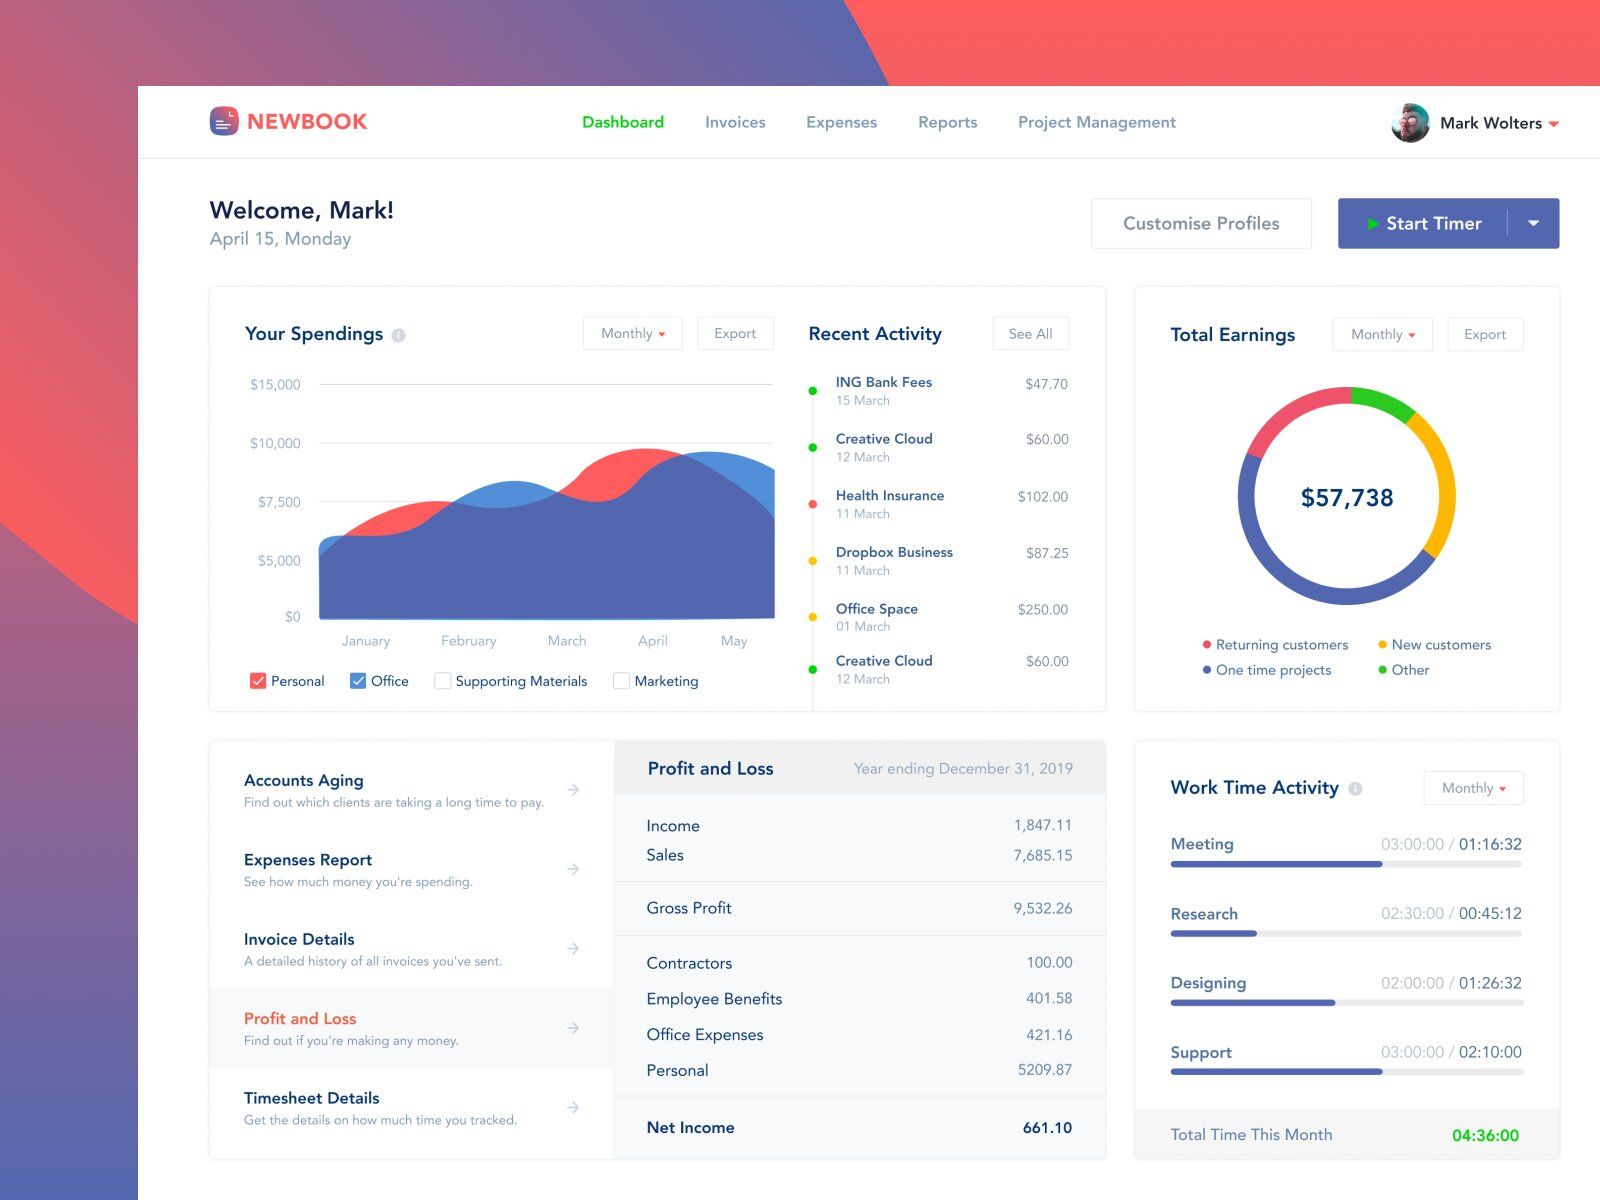 To create accounting software, you should have financial tracking feature, invoices templates, maybe even an online chat with your customers and/or suppliers (*image by [Eugen Eşanu](https://dribbble.com/larocheco){ rel="nofollow" target="_blank" .default-md}*)